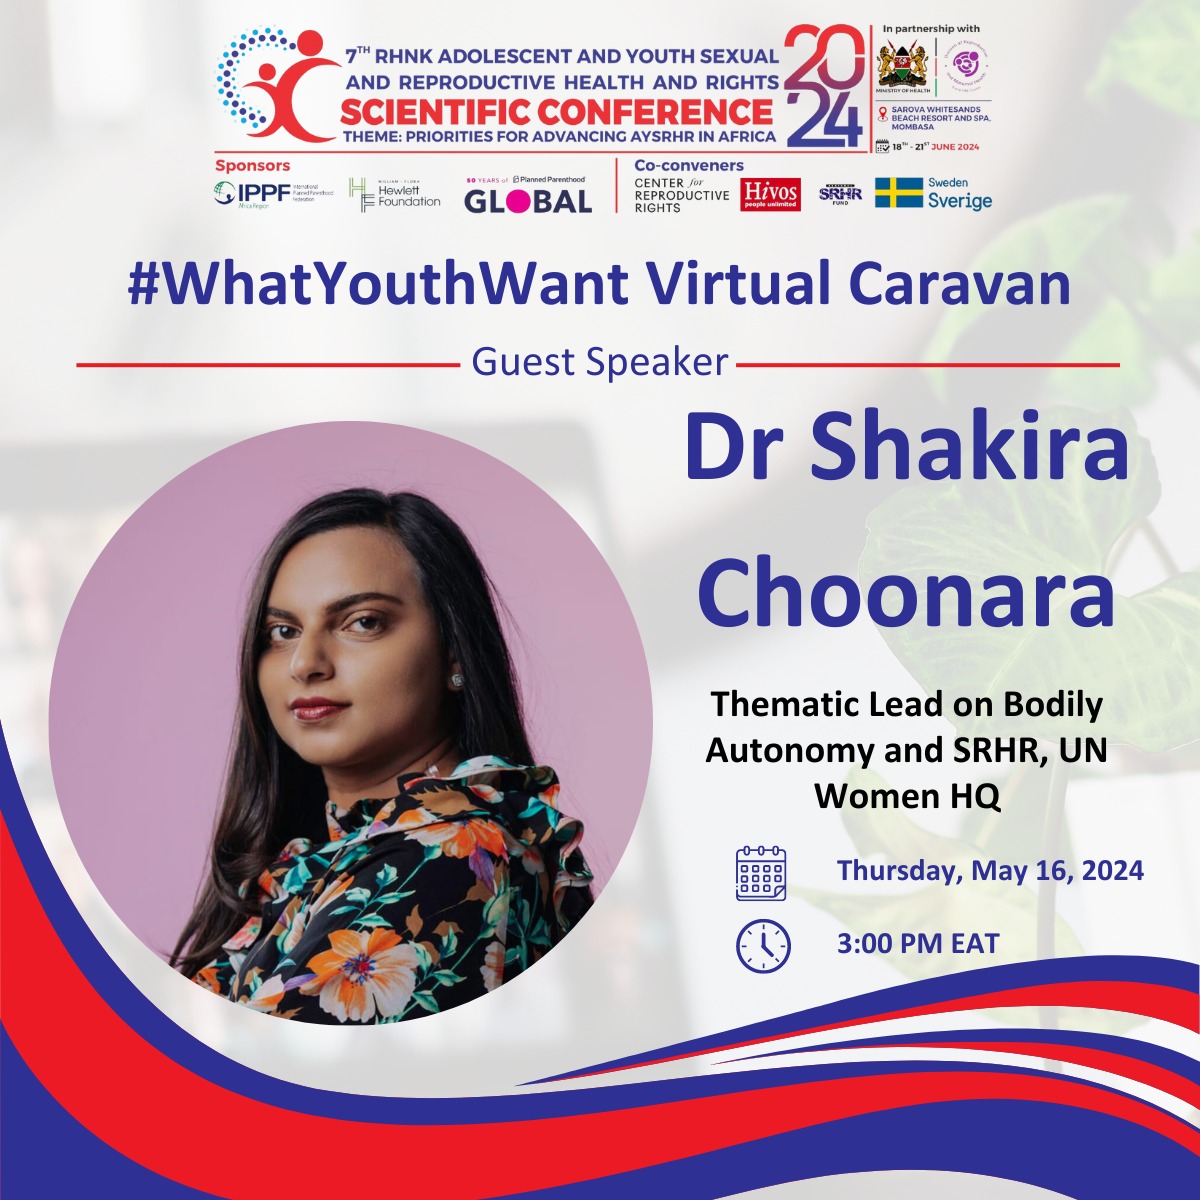 Great news! @ChoonaraShakira from @UN_Women will speak,sharing her expertise in #AYSRHR & Innovations in Adolescent&Young People's Sexual Reproductive Health.Join our virtual caravan to discuss high-impact practices & network. Register:us02web.zoom.us/meeting/regist #RHNKConference2024